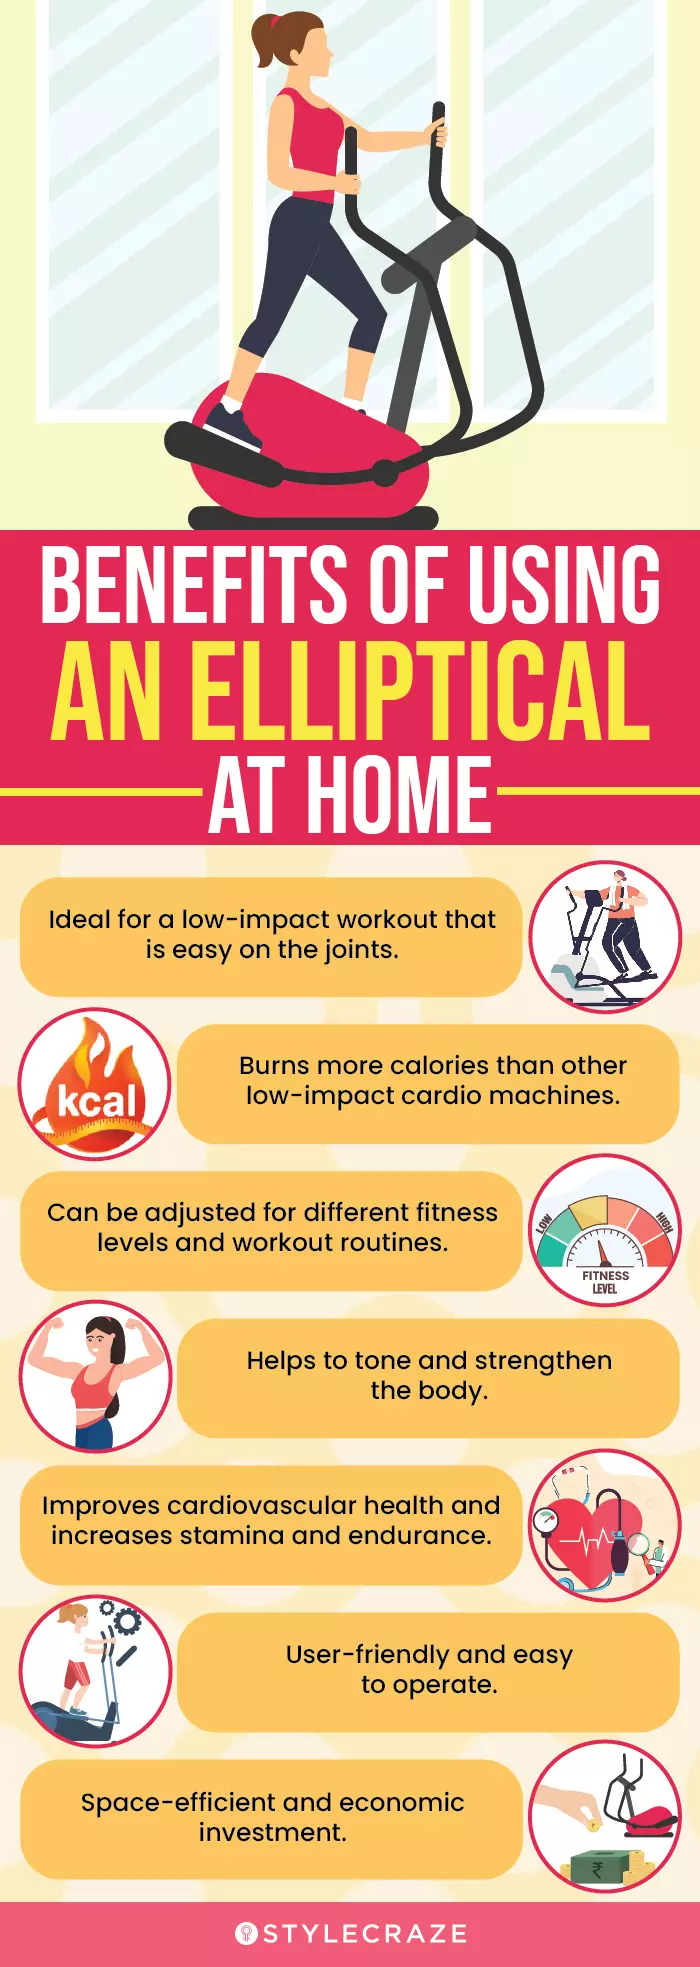 Benefits Of Using An Elliptical At Home (infographic)